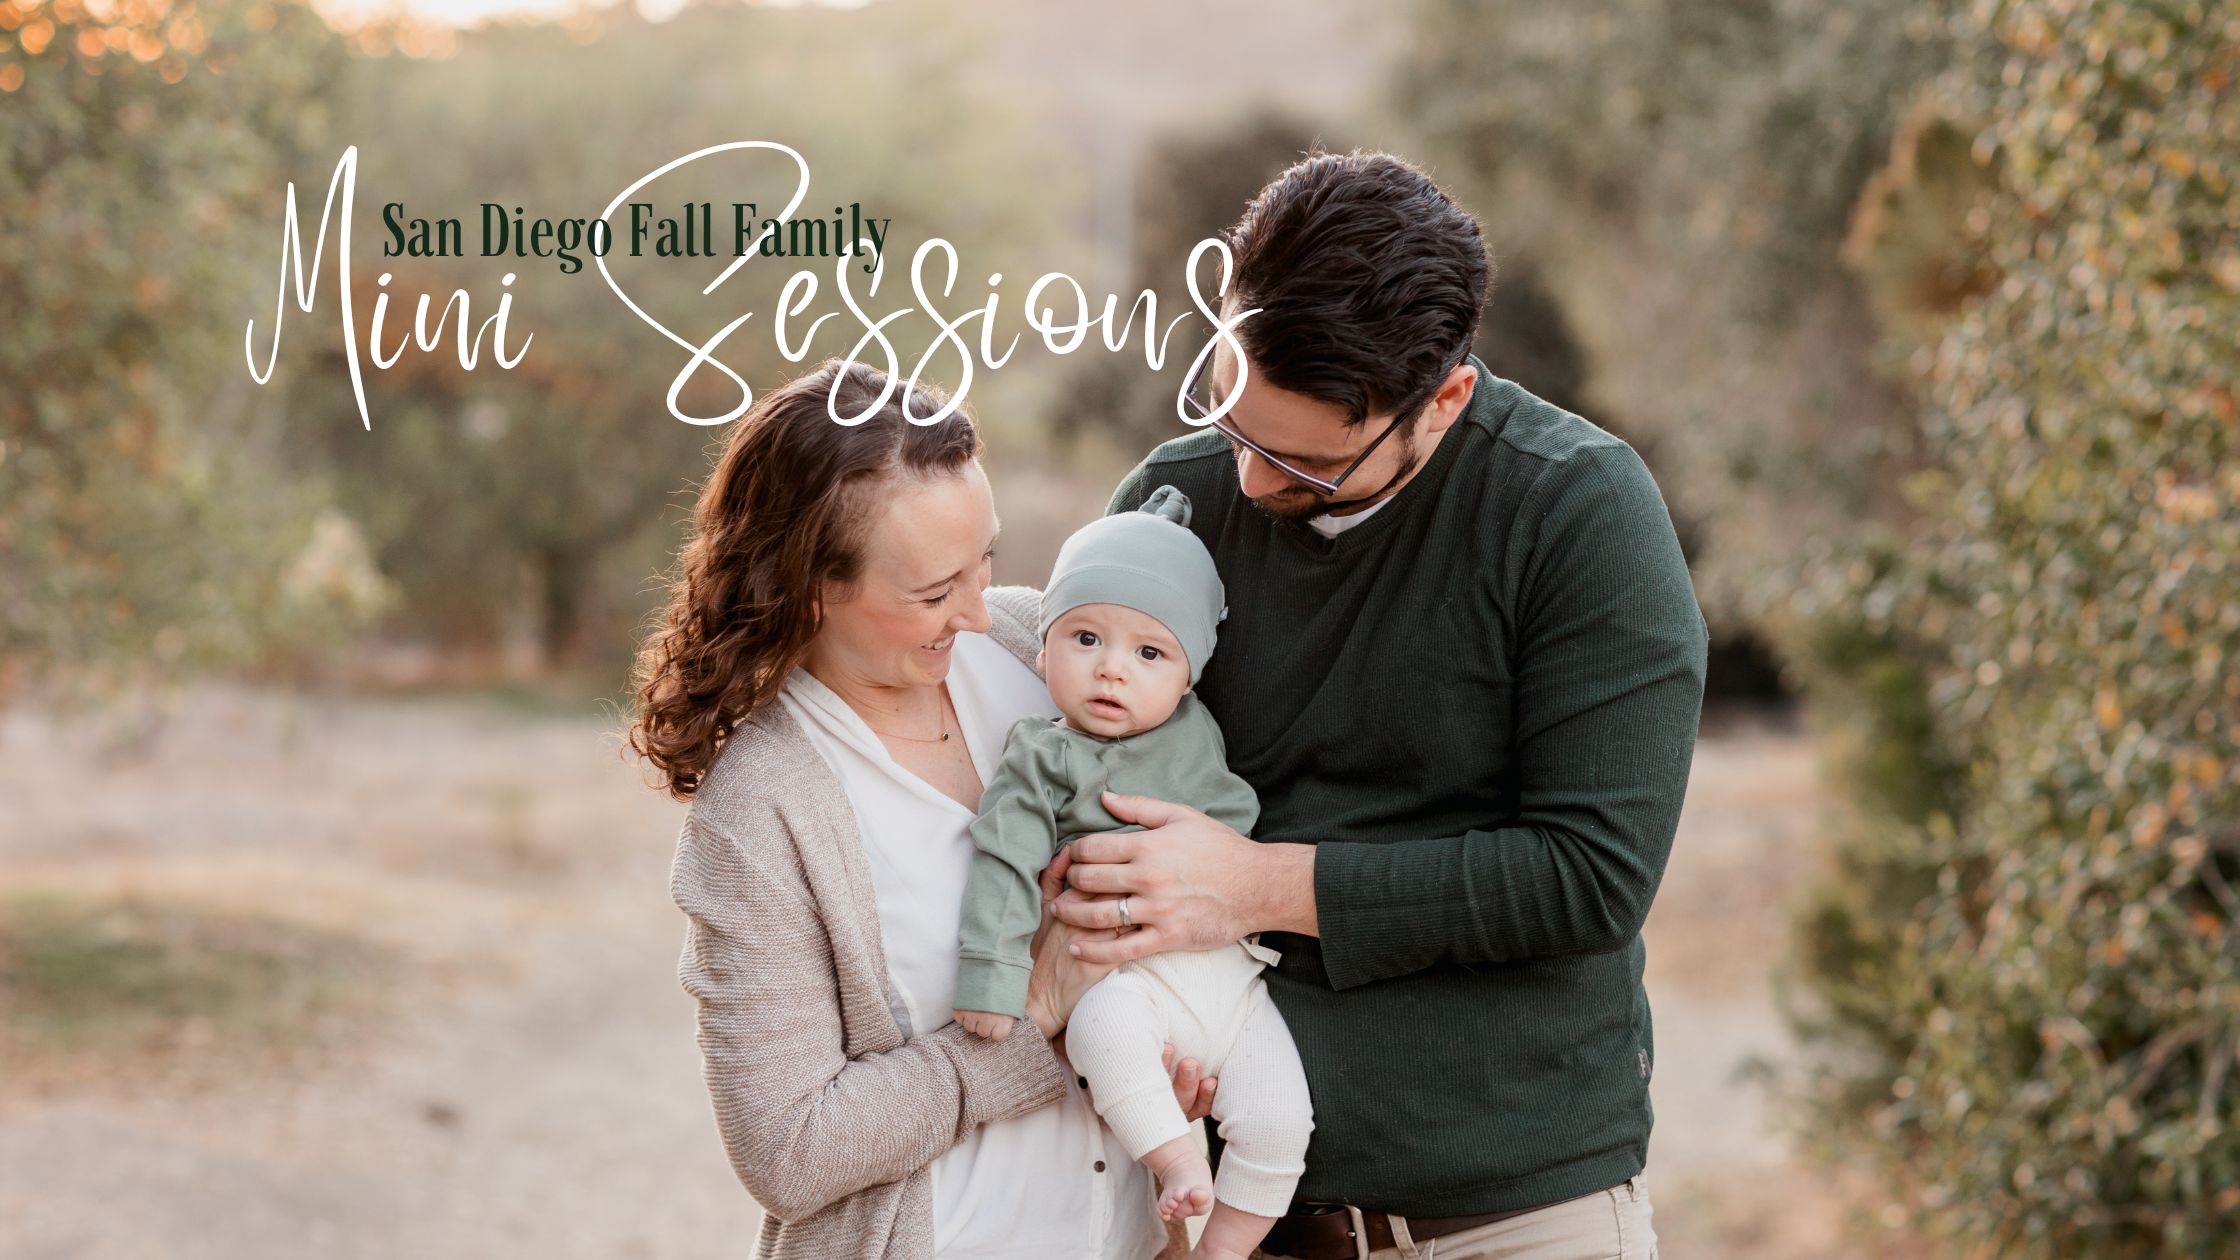 San Diego Fall Family Mini Session Website Banner